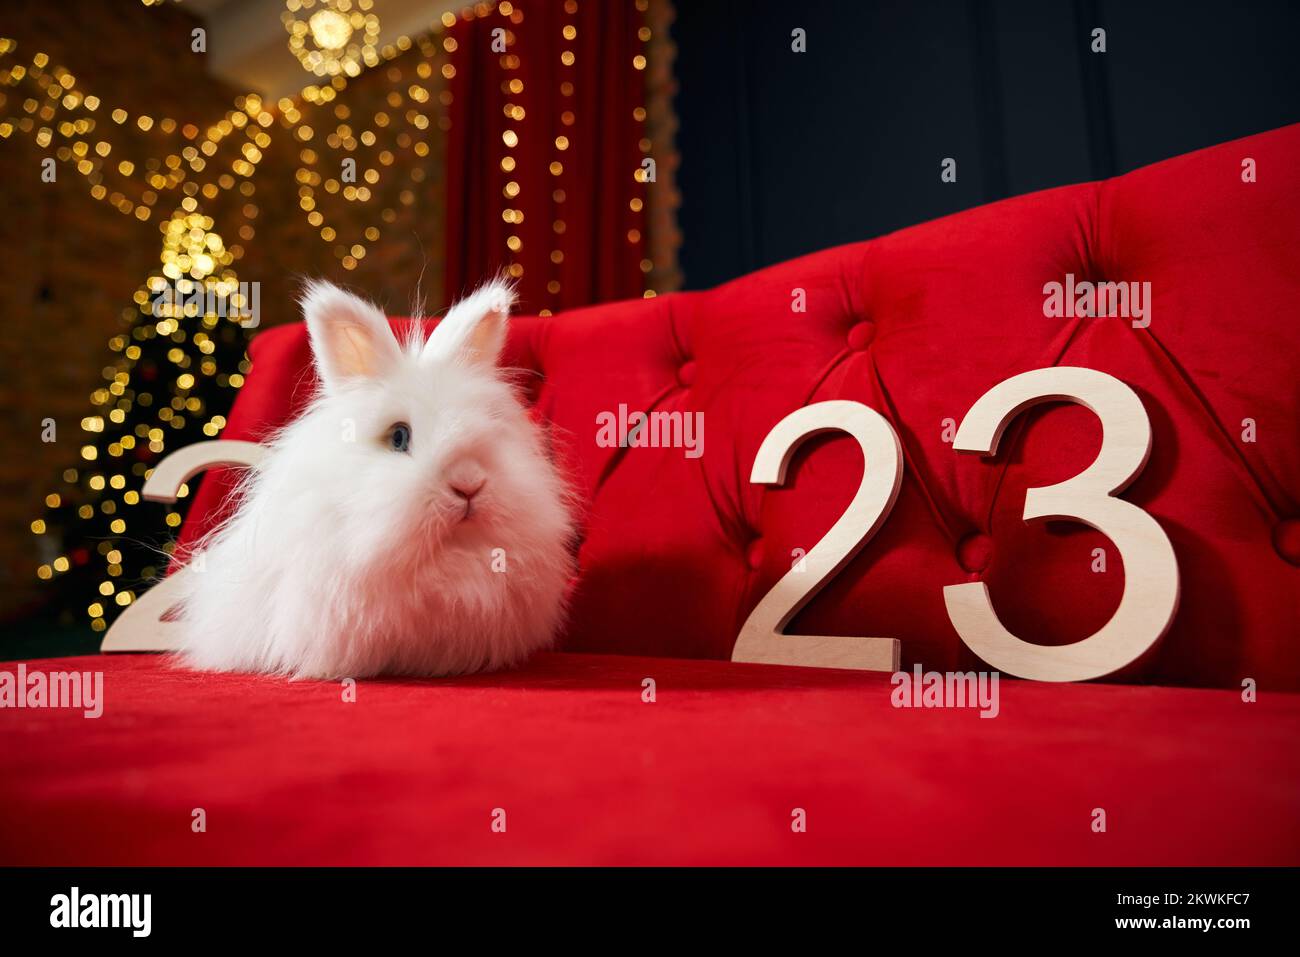 Front view of lovely, furry, white rabbit sitting on red sofa, looking. Animal, symbol of new year 2023 having photoshoot in decorated studio. Concept of new year and christmas. Stock Photo